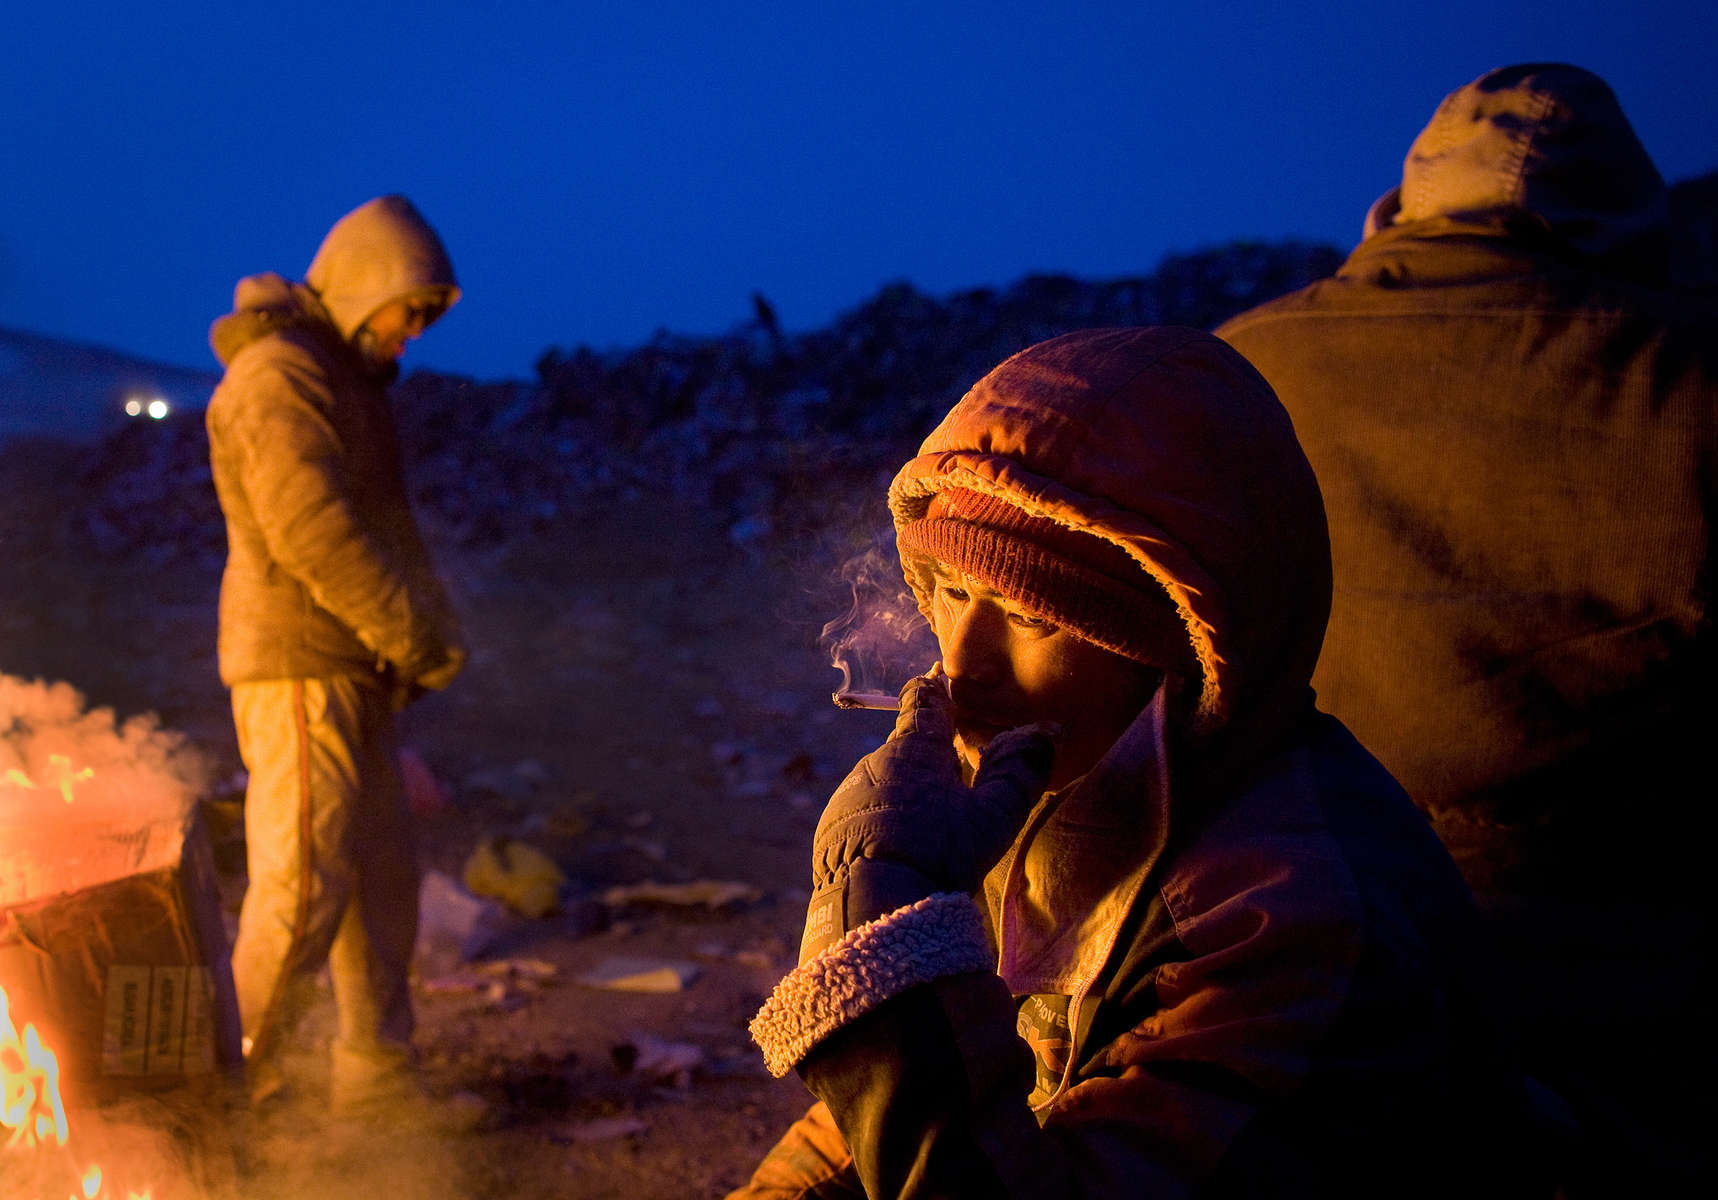 ULAAN BAATAR, MONGOLIA-MARCH 5 : Mongolian men keep warm by a fire working collecting and recycling at a dump March 5, 2010  in Ulaan Baatar, Mongolia. The average money made per day is $6.50 US. Working at the garbage dump means extreme hardship, long hours outside in frigid temperatures dropping below -25C in the Winter as Mongolia experienced one of the worst Winters in 30 years. Presently the government has declared an emergency requiring foreign aid to alleviate the impact of the {quote} Zud{quote} ( Mongolian term for a multiple natural disaster) caused by bitter cold and thick snow. Currently 1.5 million goats,  921,000 sheep, 169,000 cows and yaks, 89,000 horses and 1,500 camels had died according to the various UN agency reports. Many Mongolians have immigrated to the capitol city from the far away provinces seeking employment, living in rented traditional circular felt yurts with no running water or electricity.(Photo by Paula Bronstein /Getty Images)